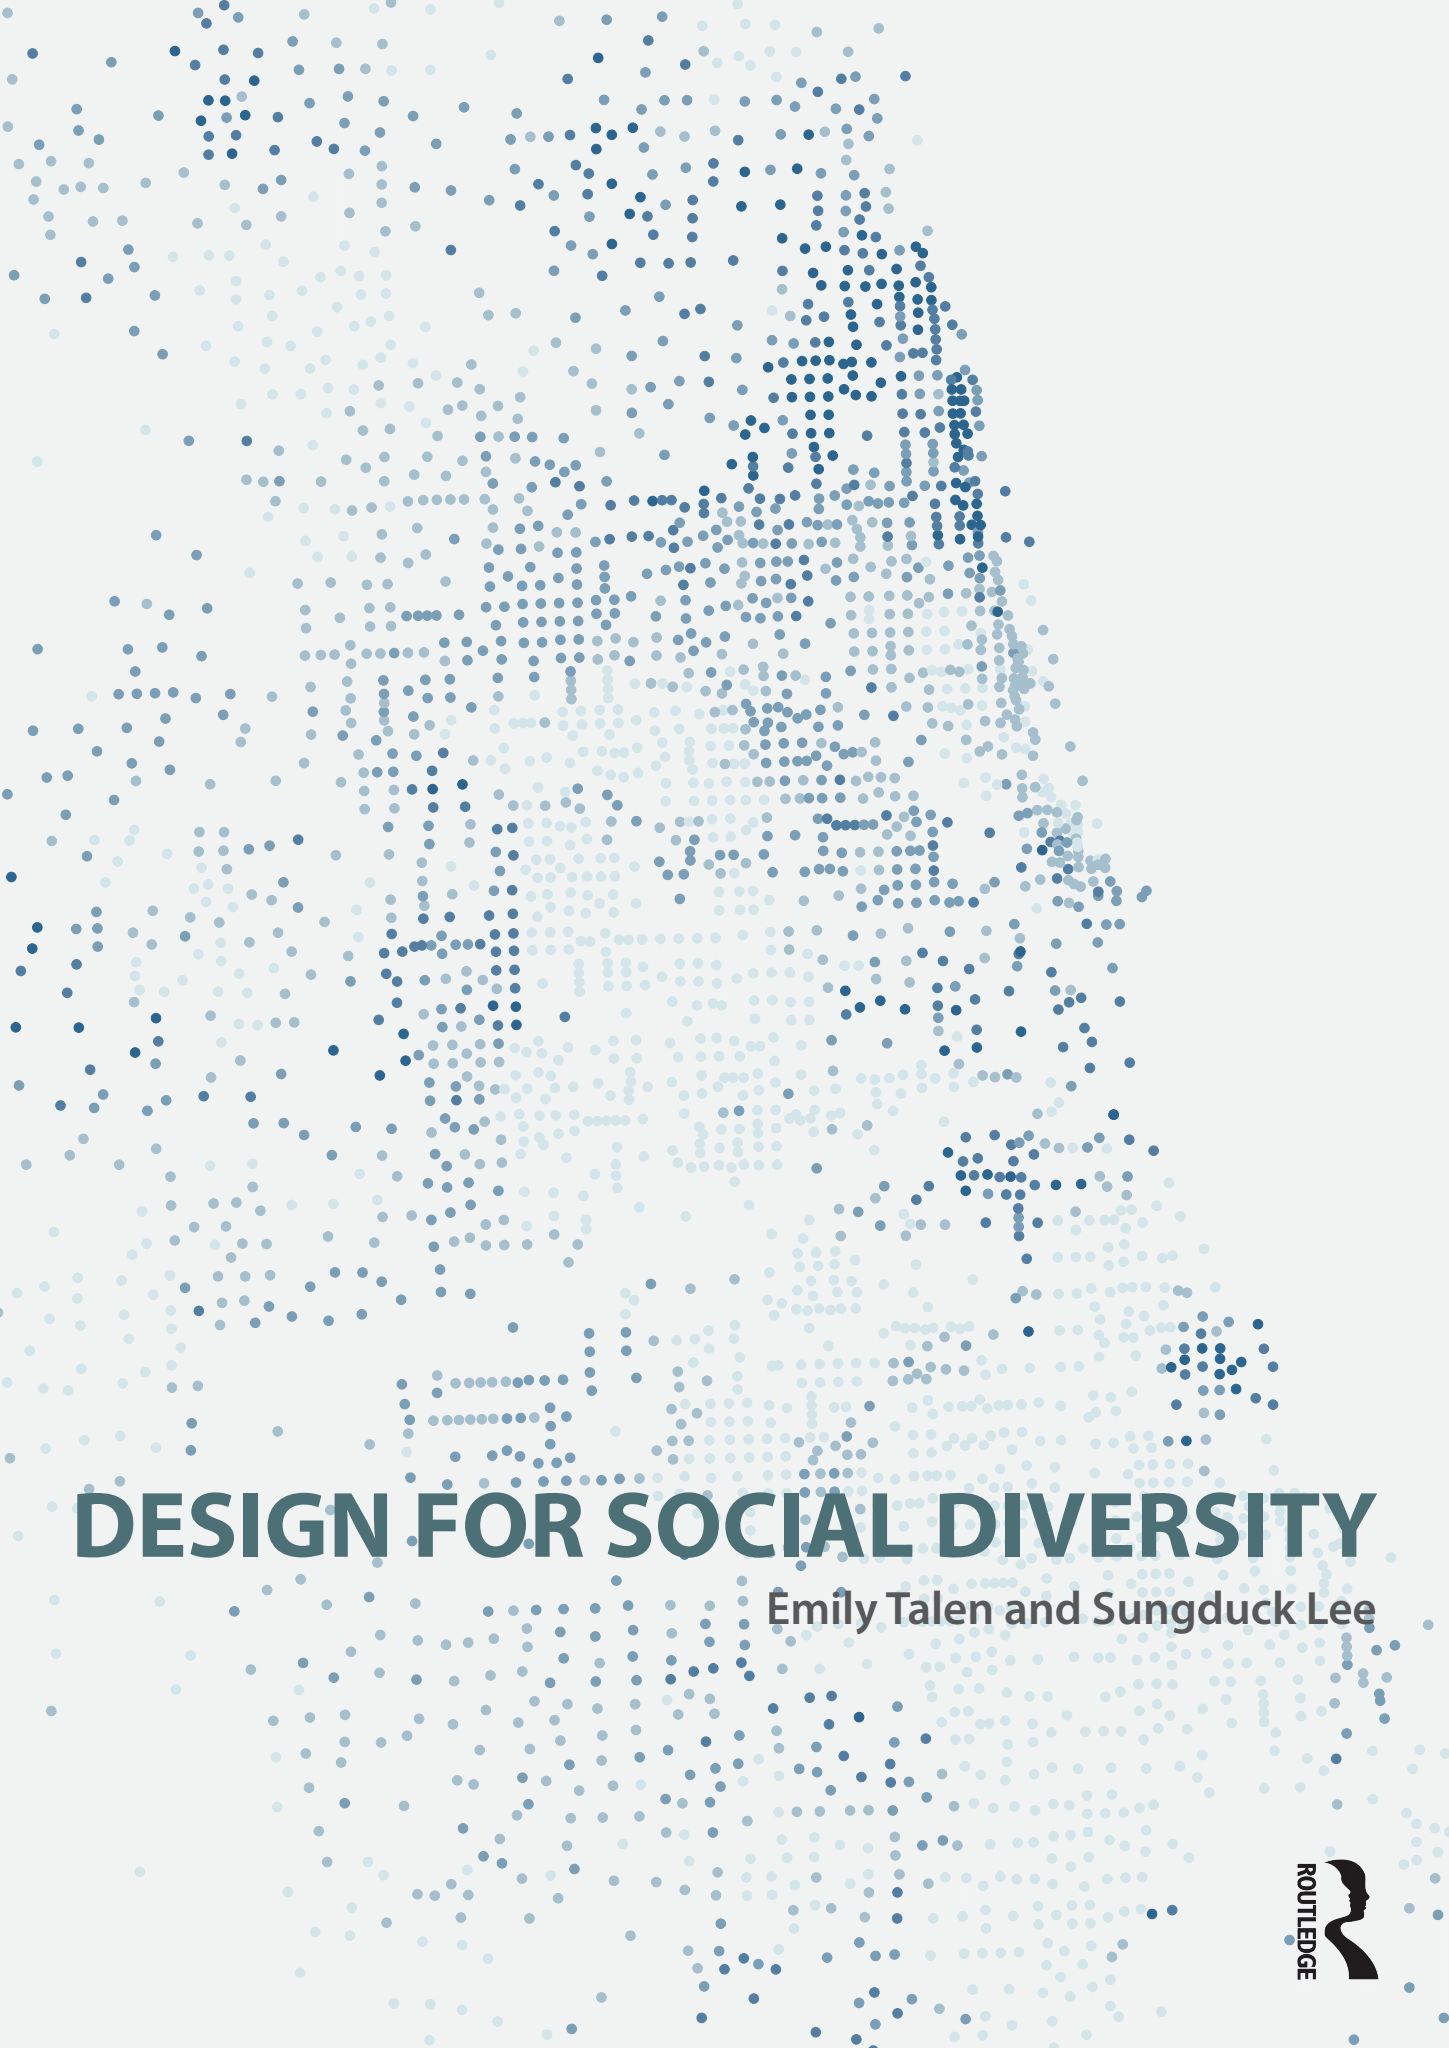 Design for Social Diversity by Emily Talen and Sungduck Lee